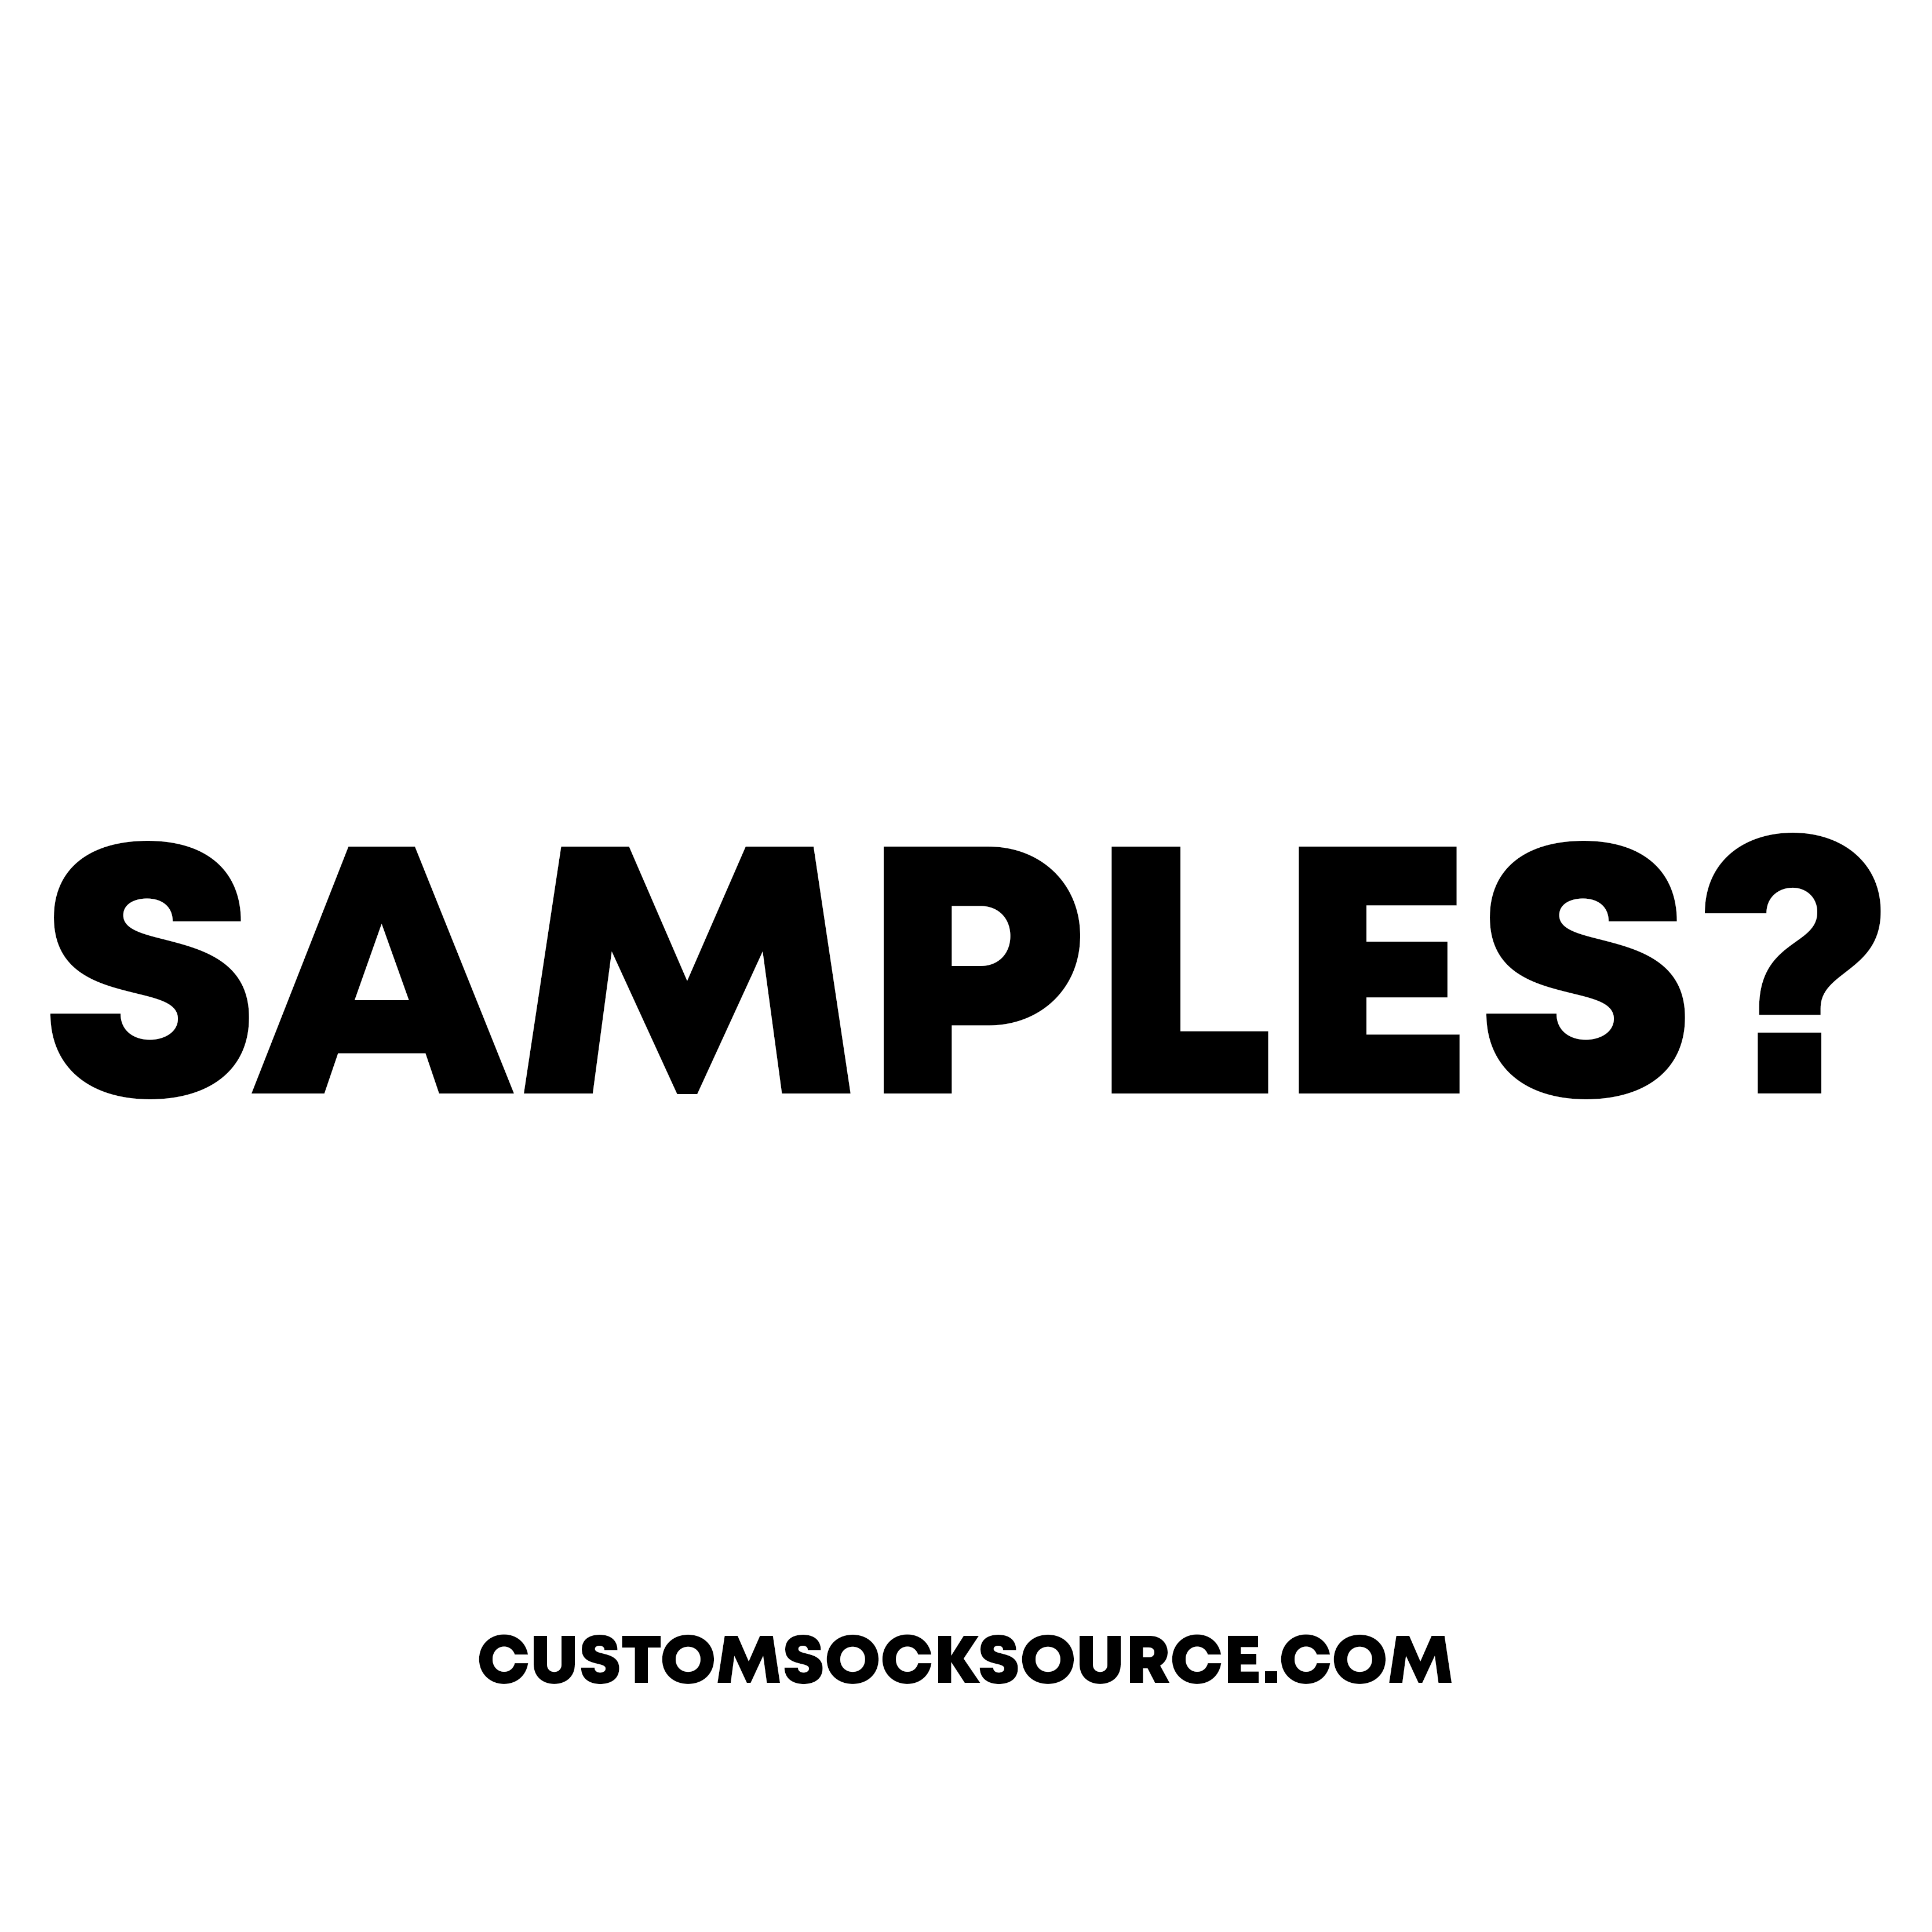 Do you need a physical sample proof?